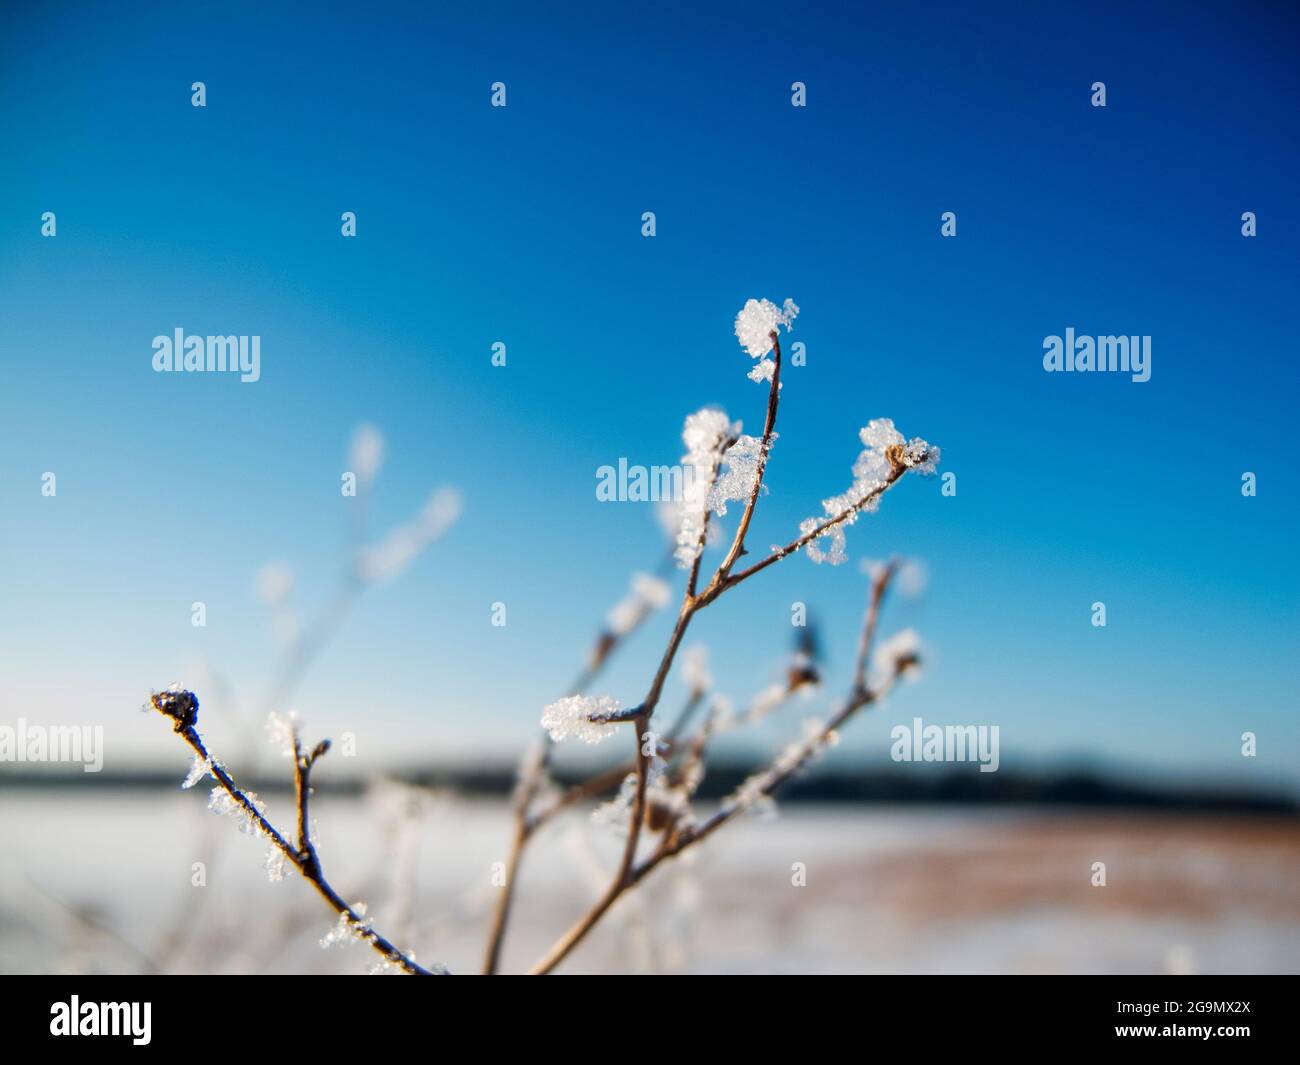 Close-up of a leafless branch covered with ice crystals in front of a blurred winter landscape with blue sky and sunshine. Stock Photo